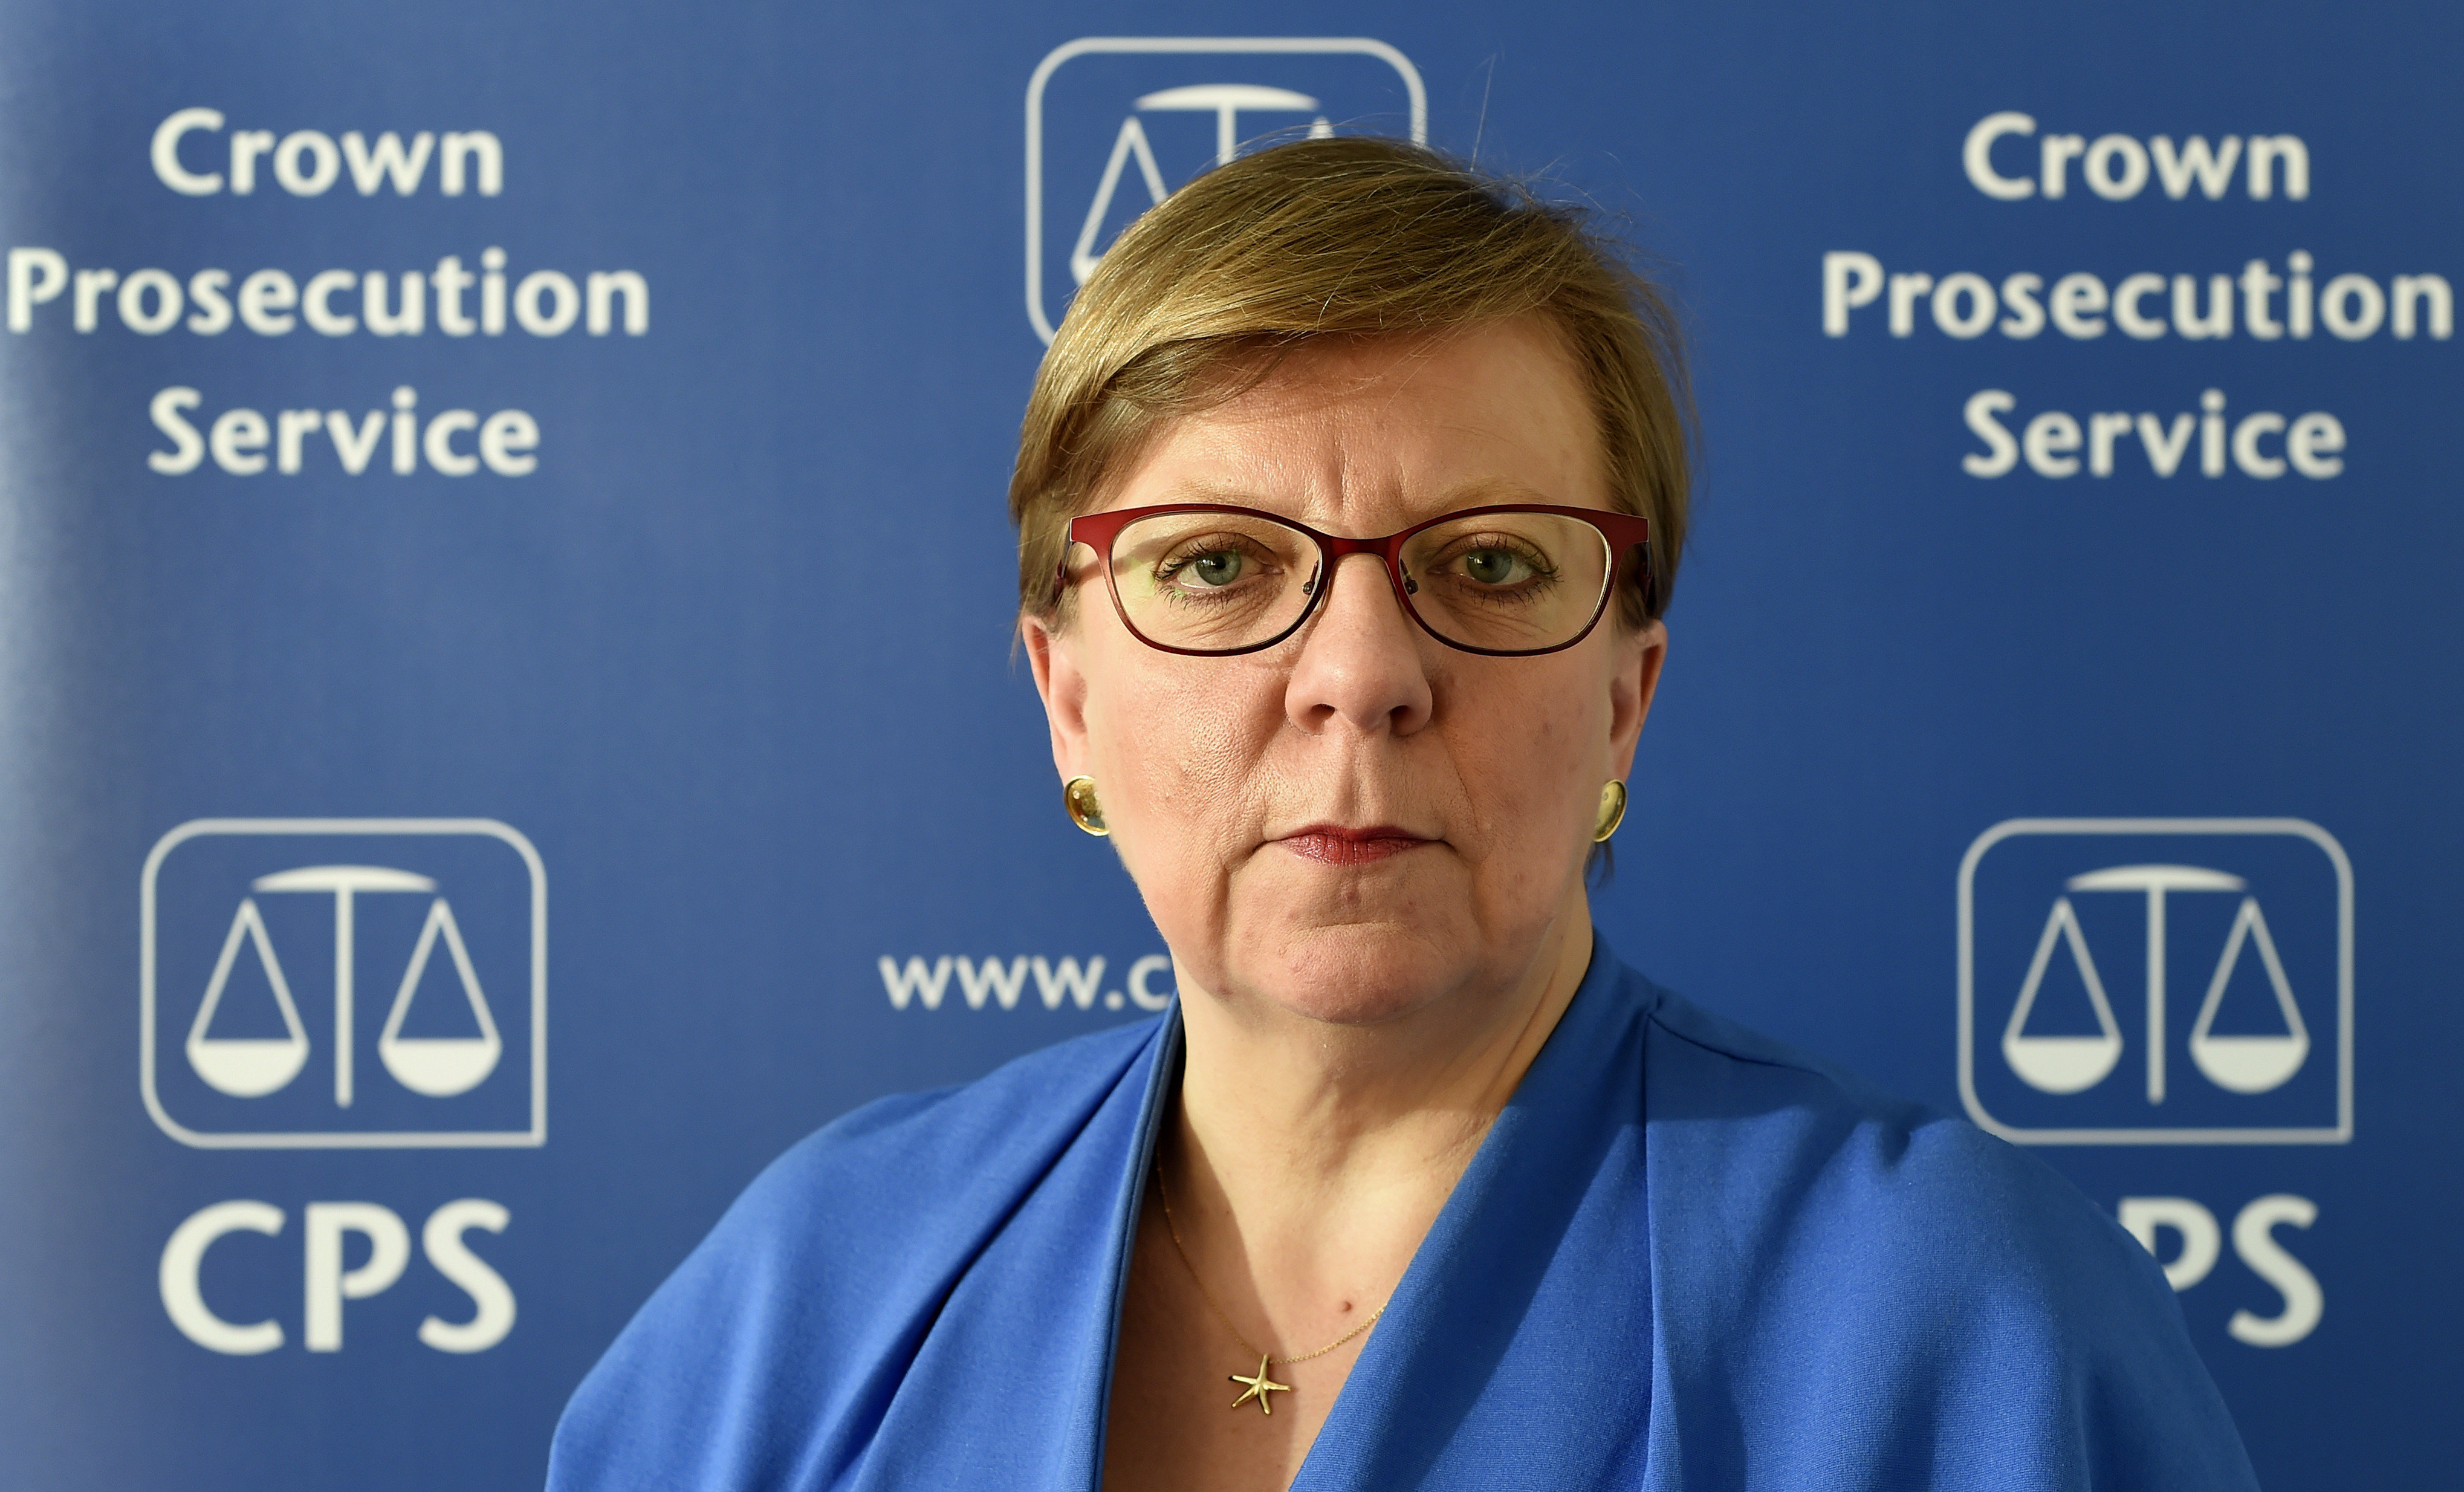 <strong>Director of Public Prosecutions, Alison Saunders, has been criticised for comments she made around consent</strong>